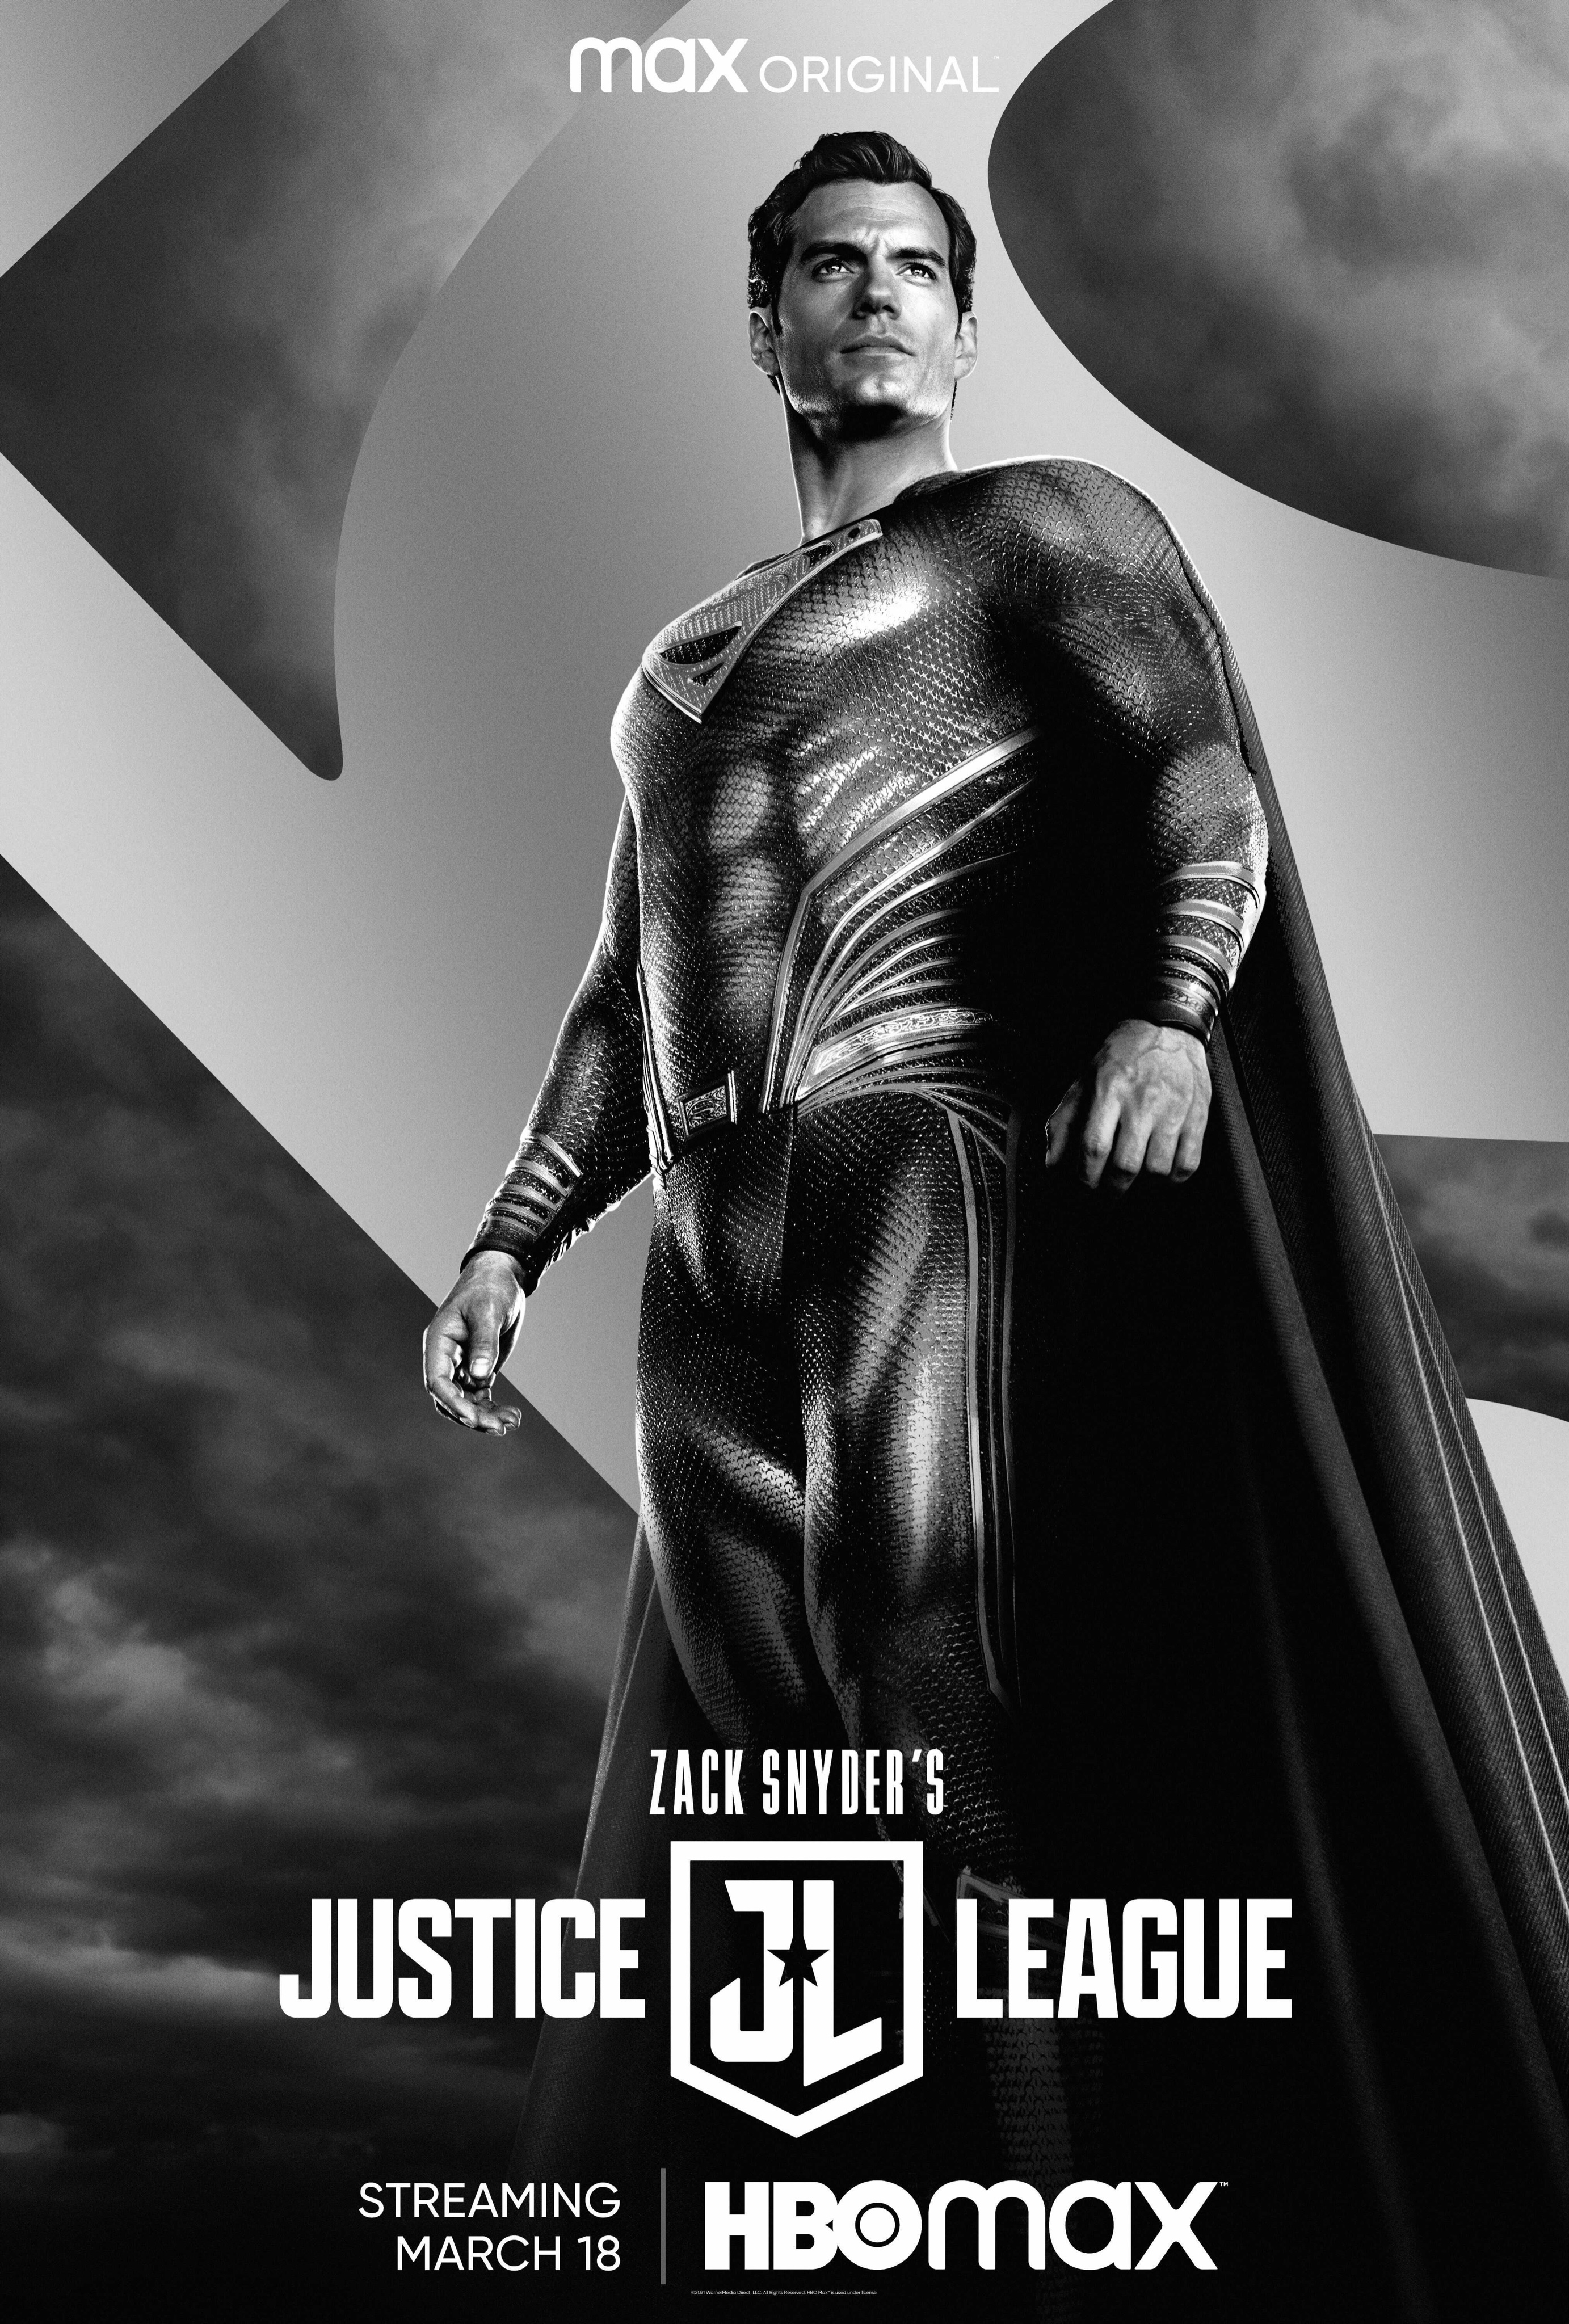 Zack Snyder's Justice League - Character Poster - Superman